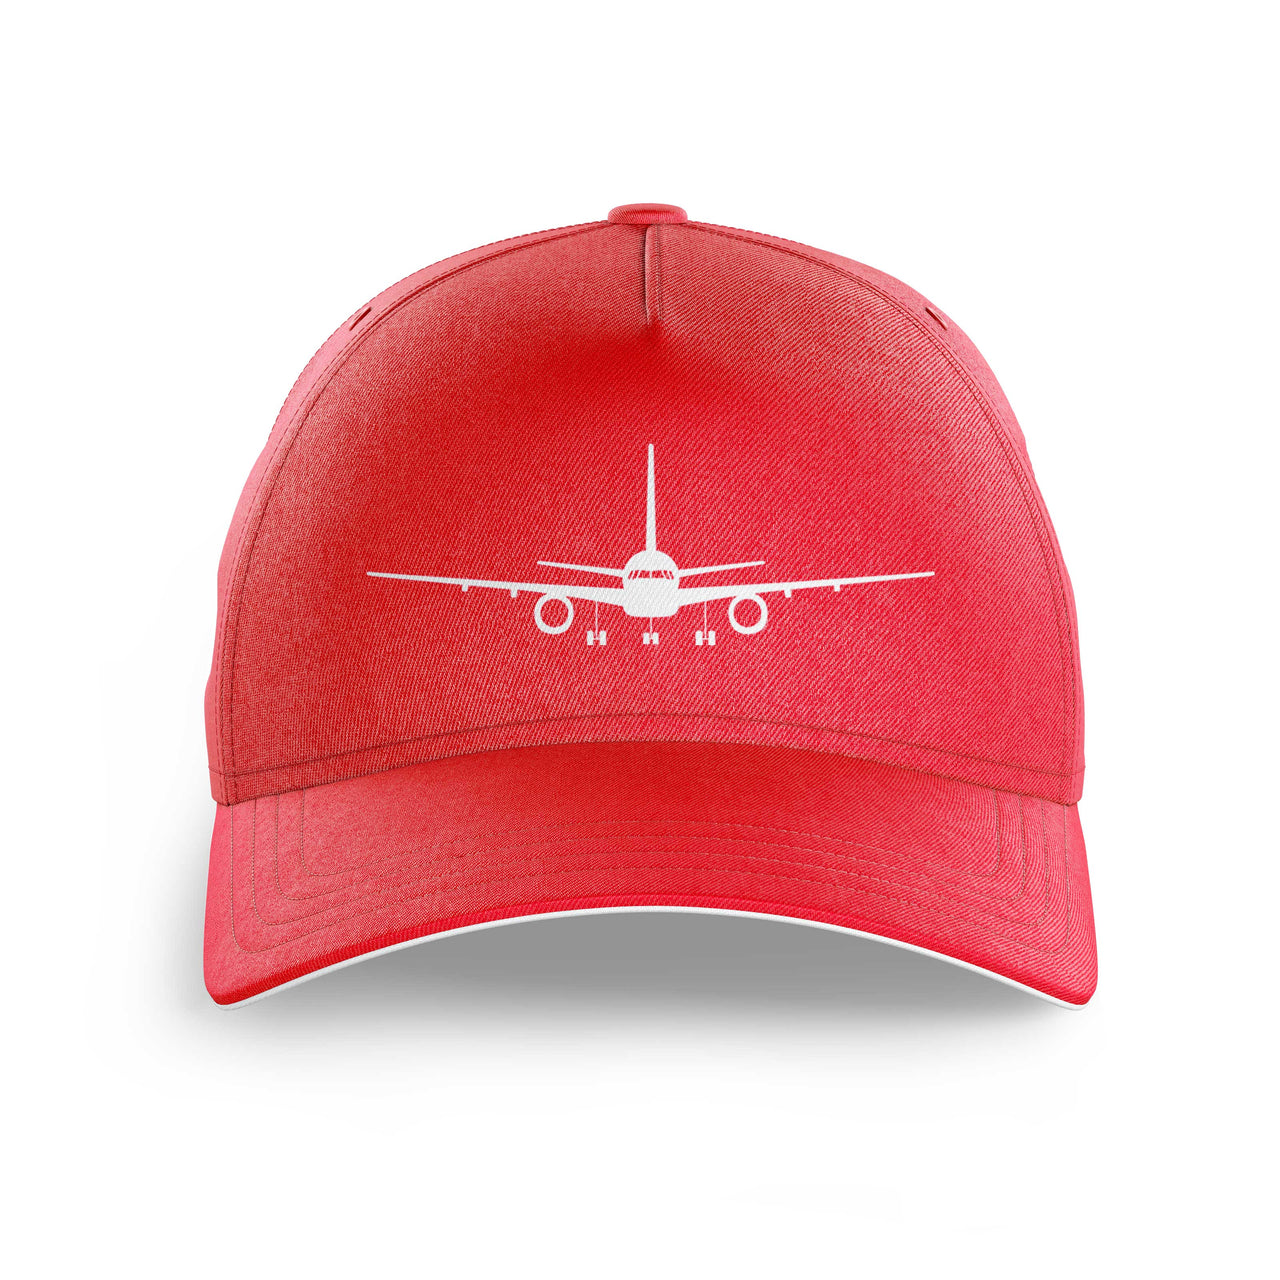 Boeing 757 Silhouette Printed Hats